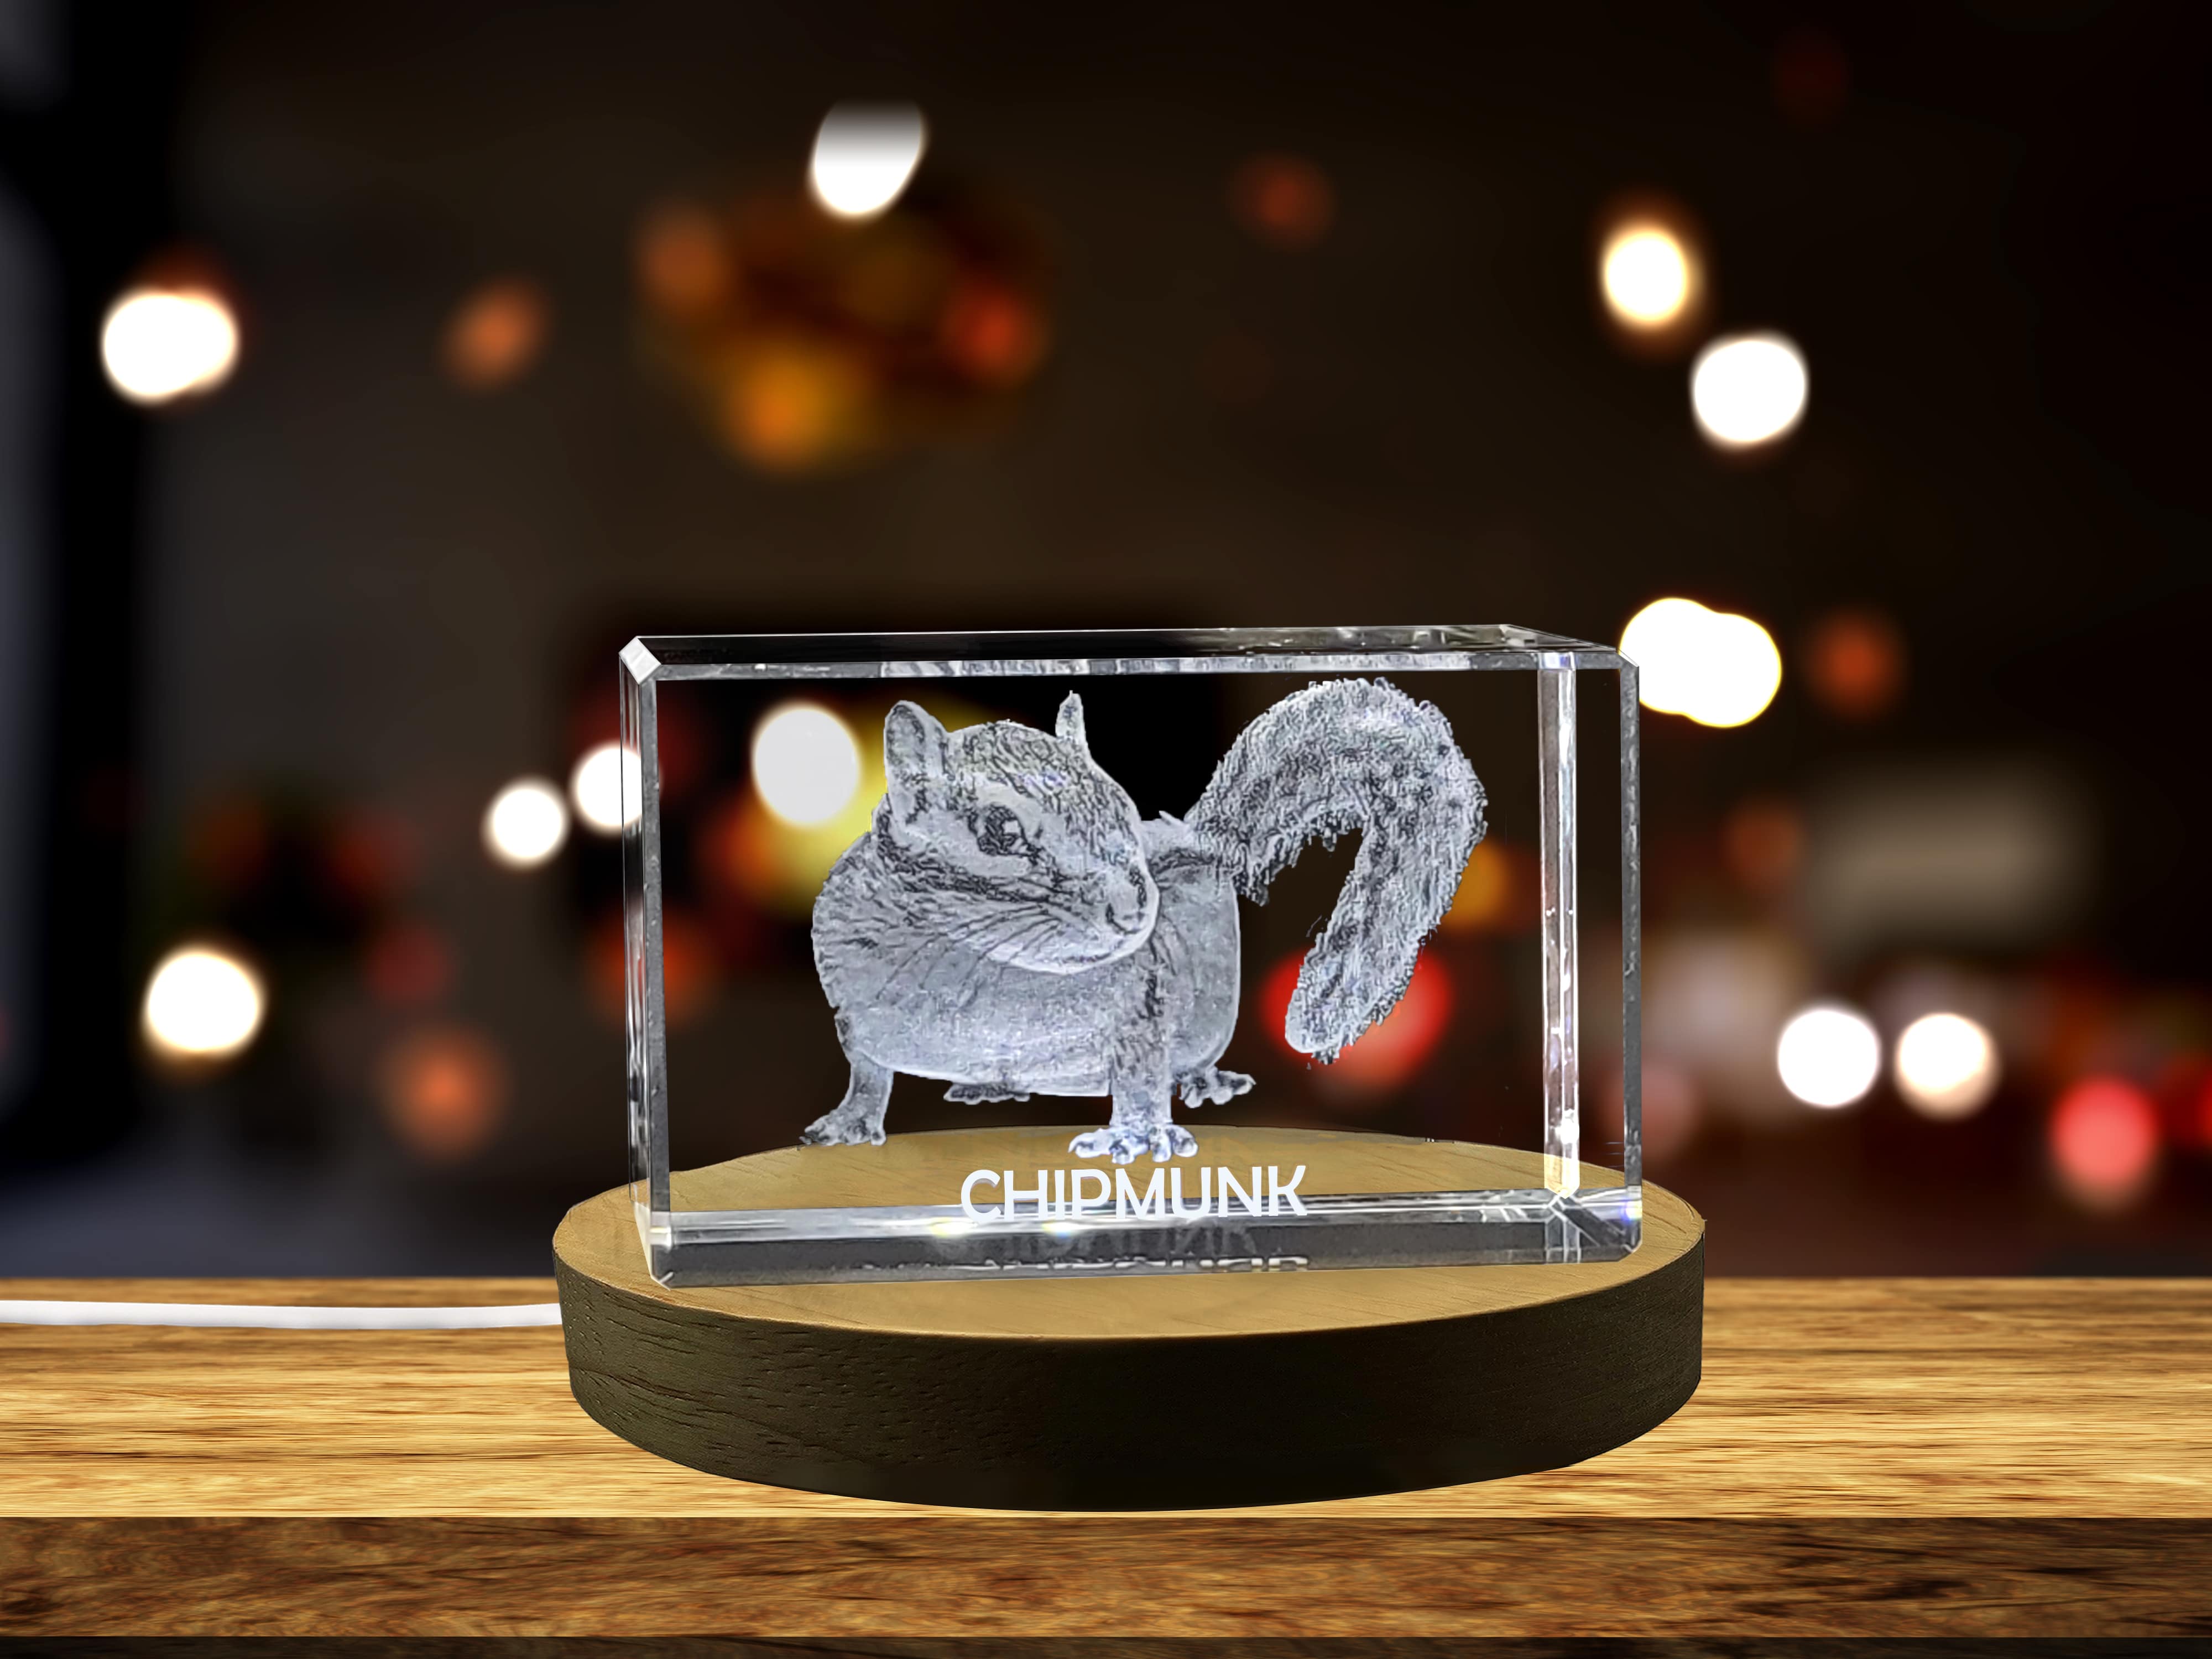 Adorable 3D Engraved Crystal of a Playful Chipmunk - Perfect for Nature Lovers and Outdoor Enthusiasts A&B Crystal Collection